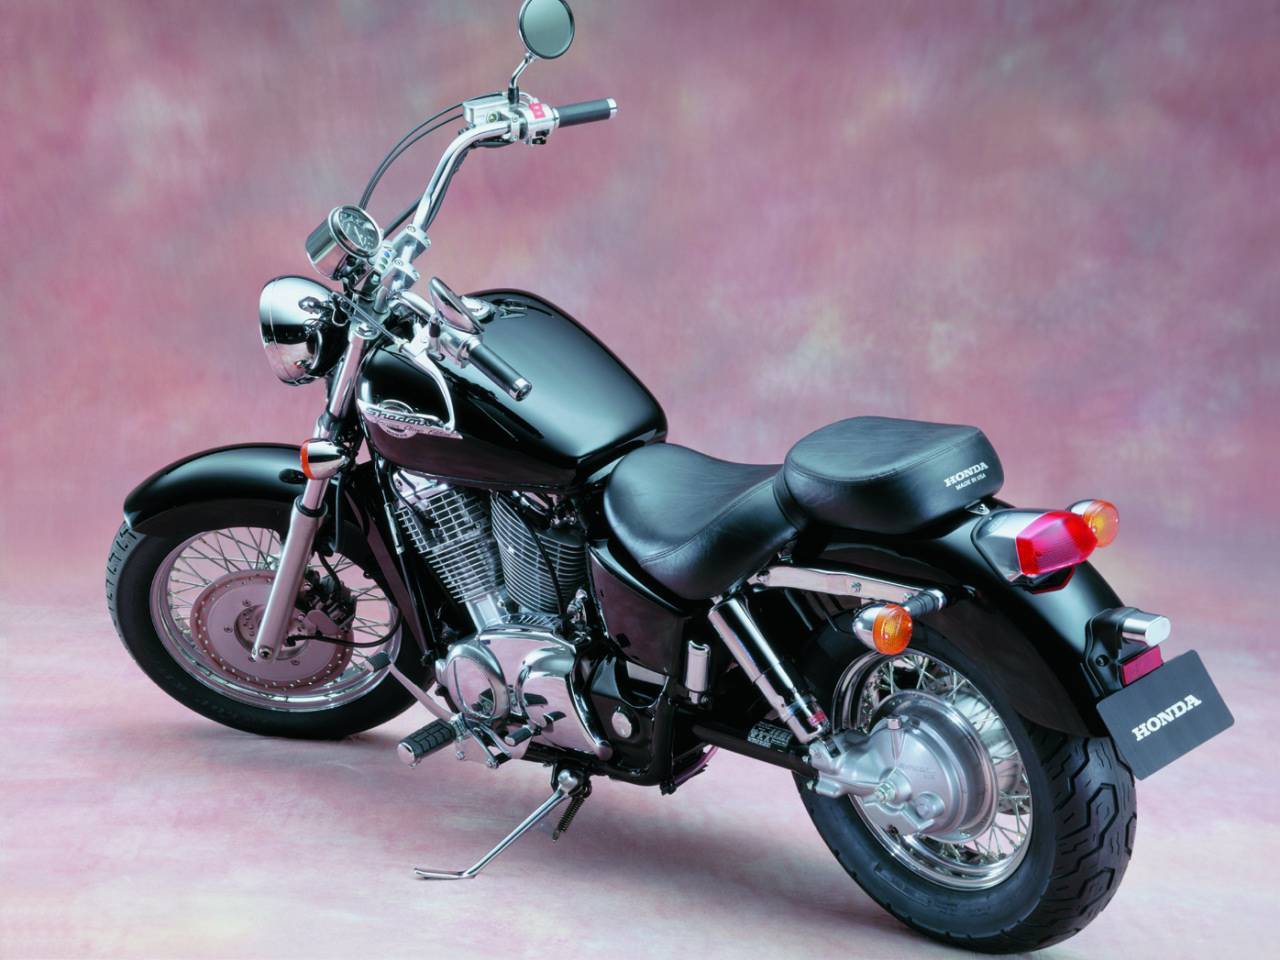 Honda vt1100c2 shadow sabre: detailed specs, background, performance, and more - viking bags